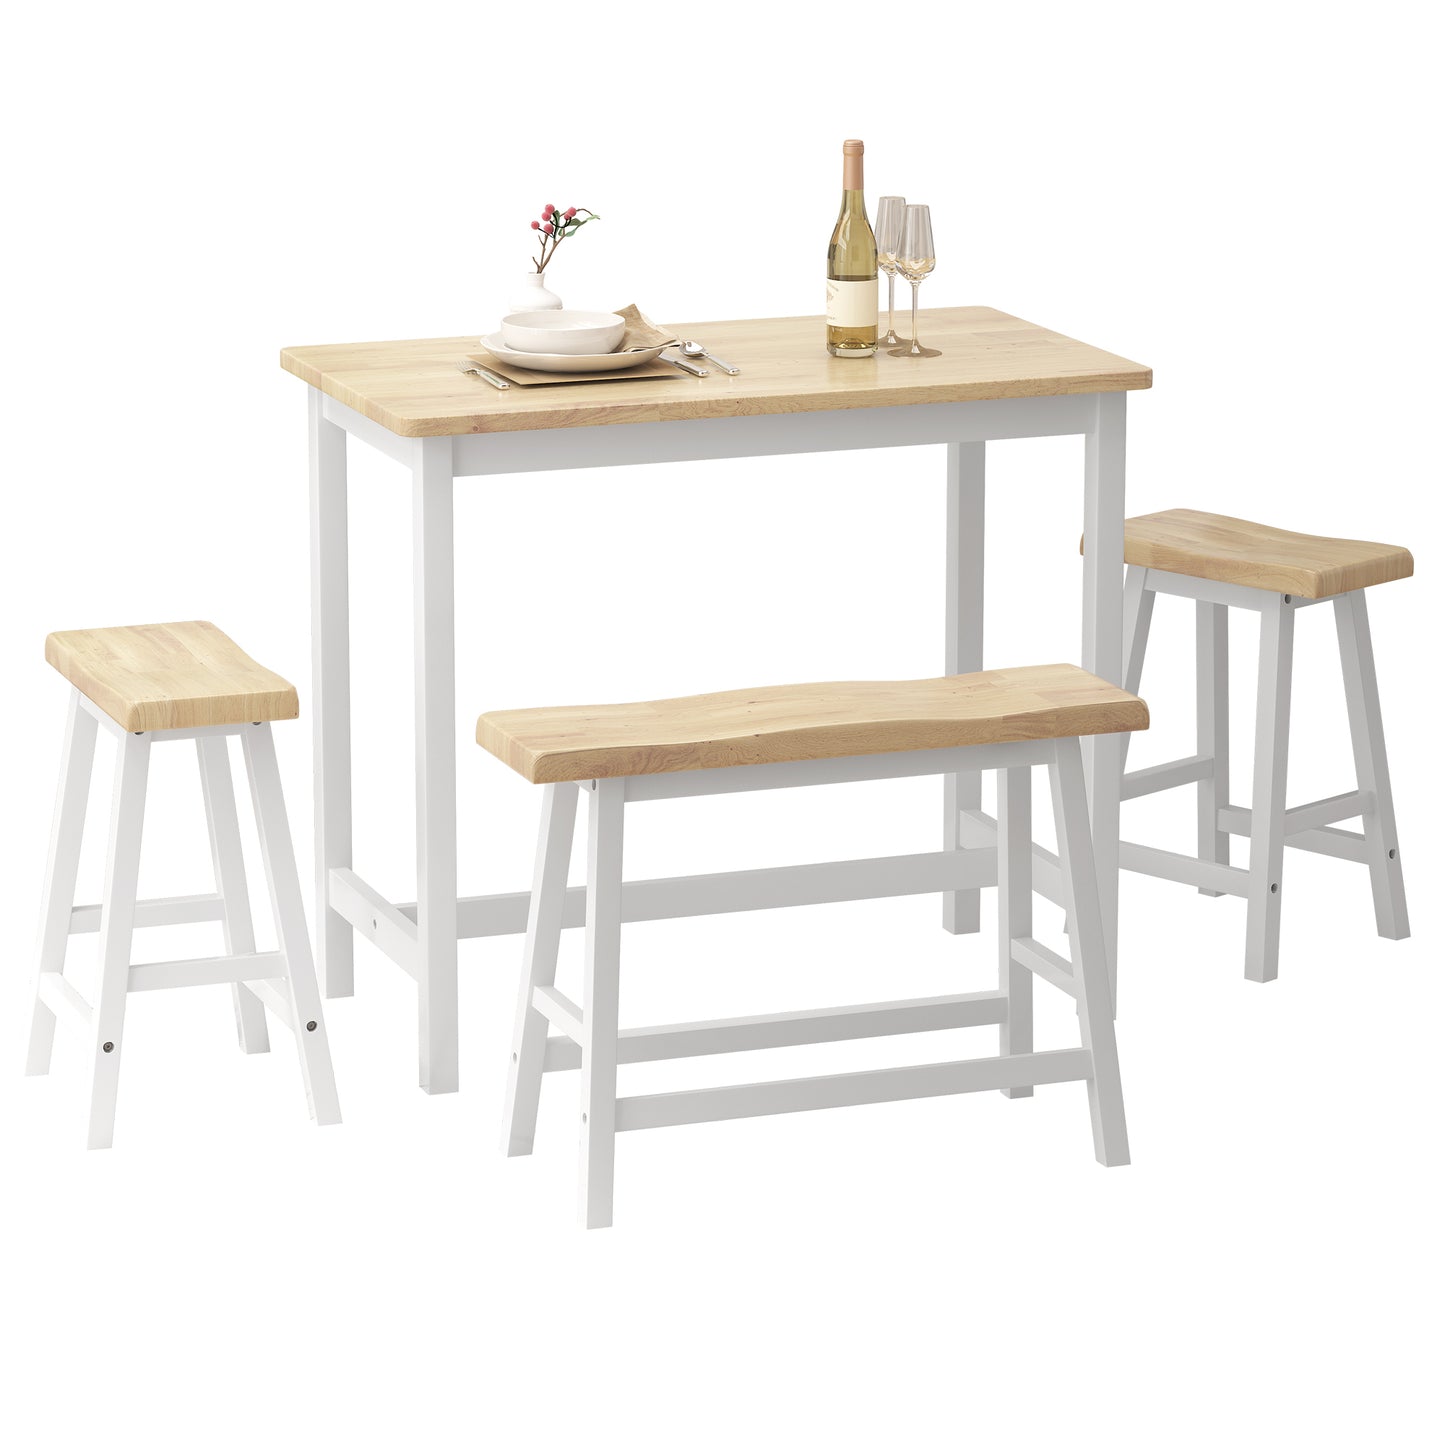 Modern Bar Dining Table Set for 4 All Rubber Wood Kitchen Bistro Counter Height Table Bench Stool for Dining Room Small Space Natural Color & White